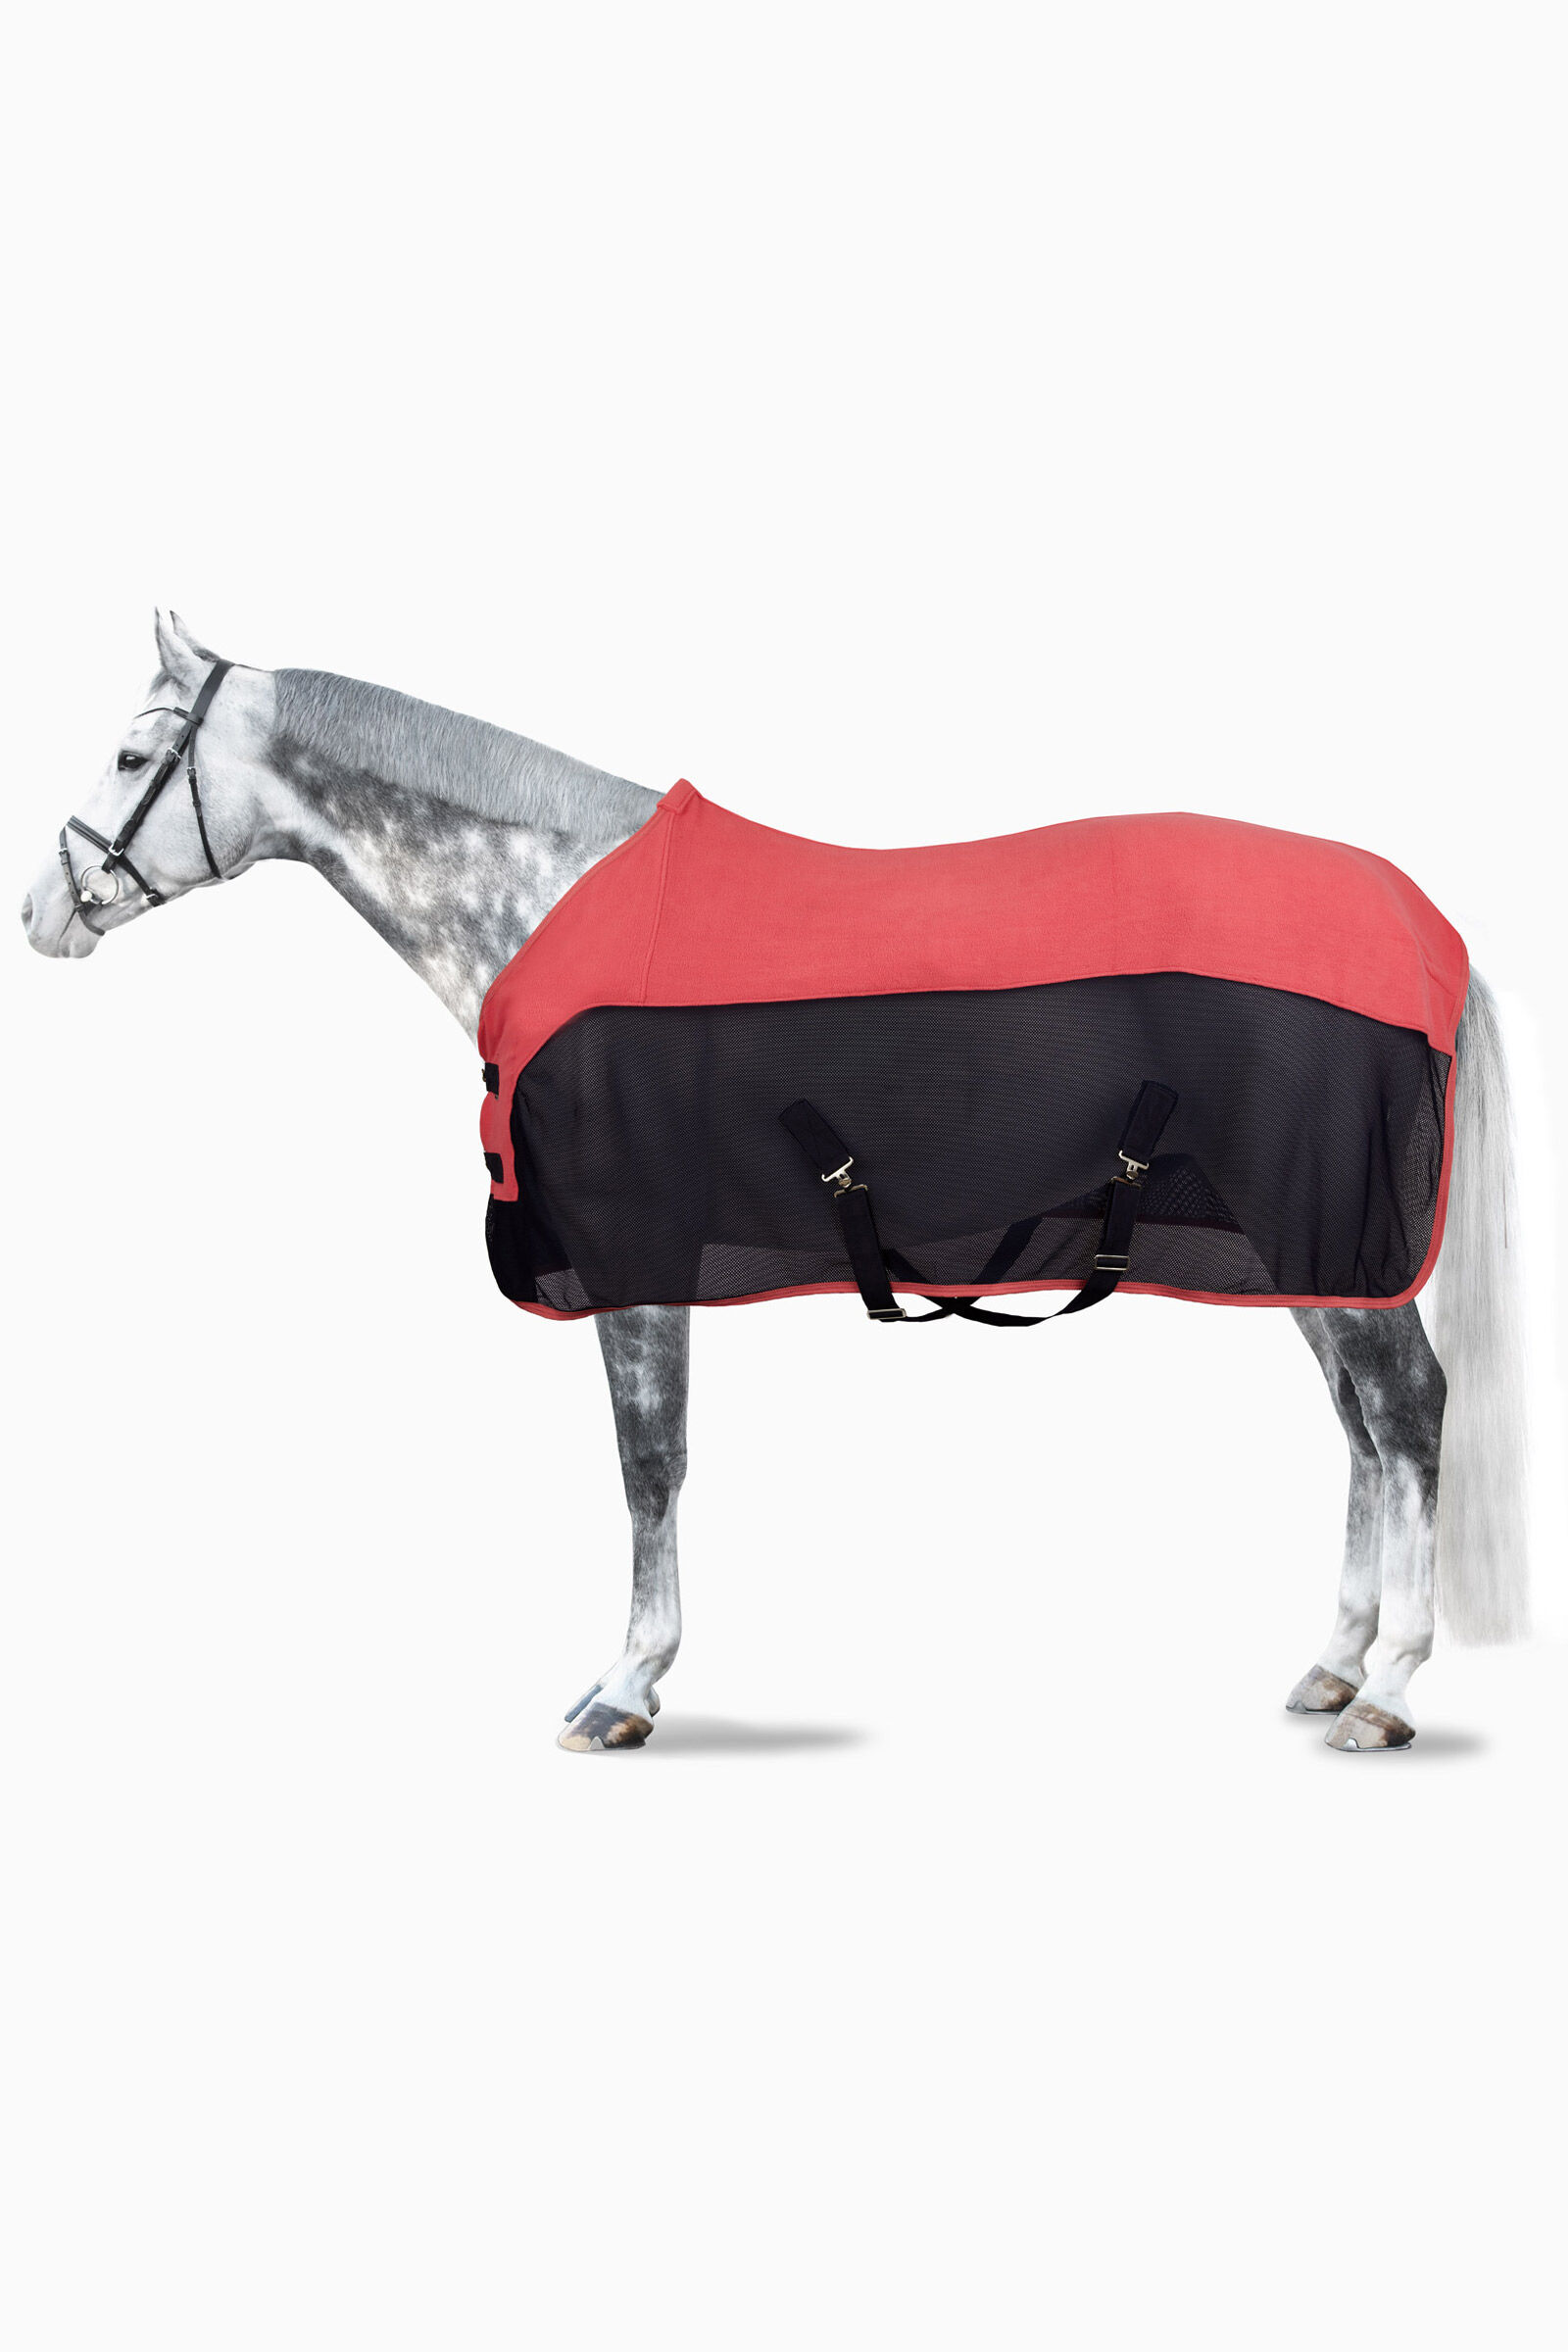 High Quality Two-Tone Soft Fleece Cooler Horse Travel Rug 5'0" Black/Red 